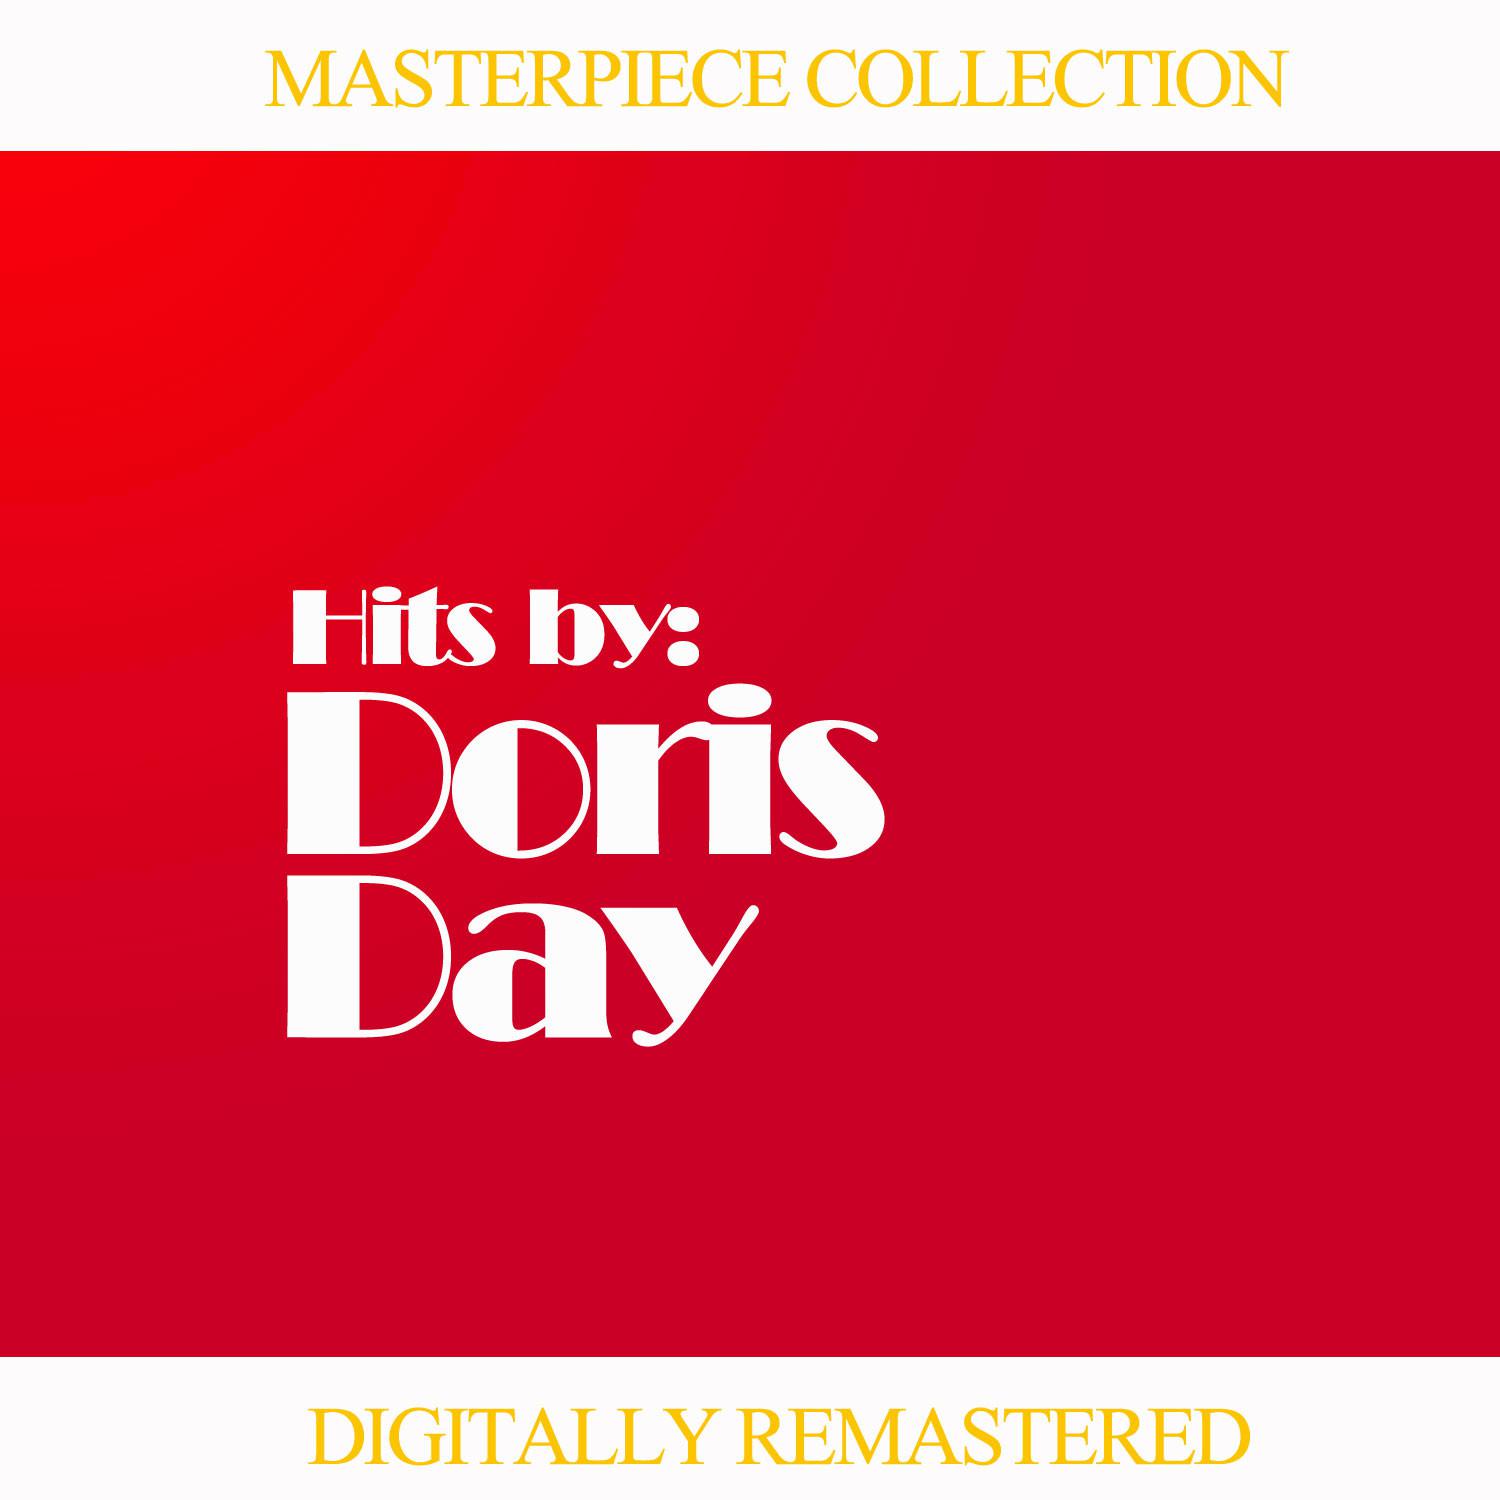 Masterpiece Collection Of Doris Day